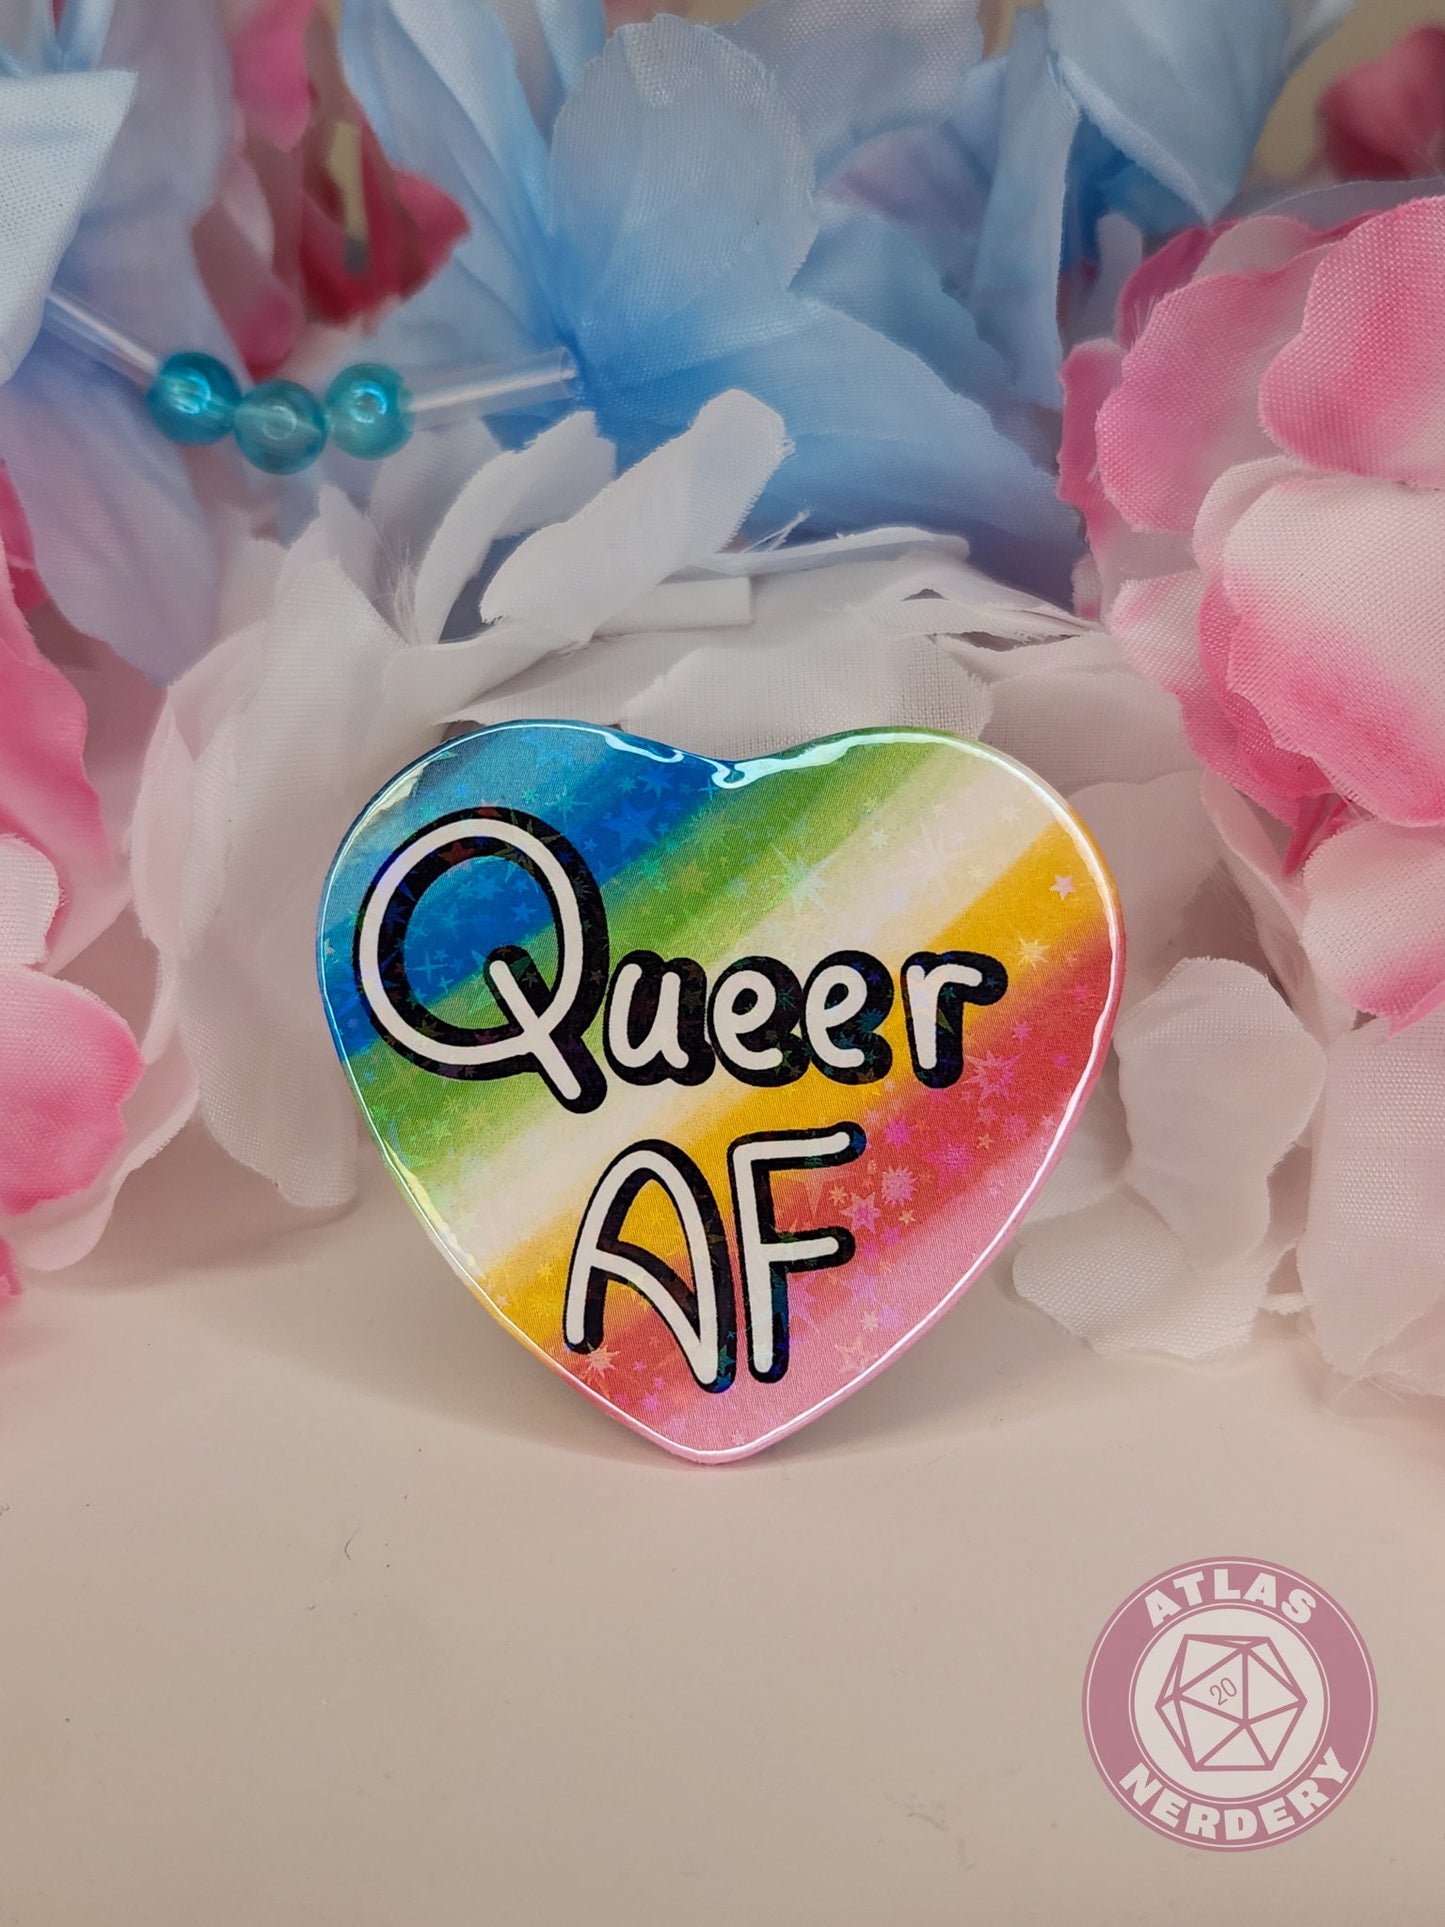 Queer AF - Queer Pride Flag 2.25” x 2” Holographic Heart Shaped Pinback Button